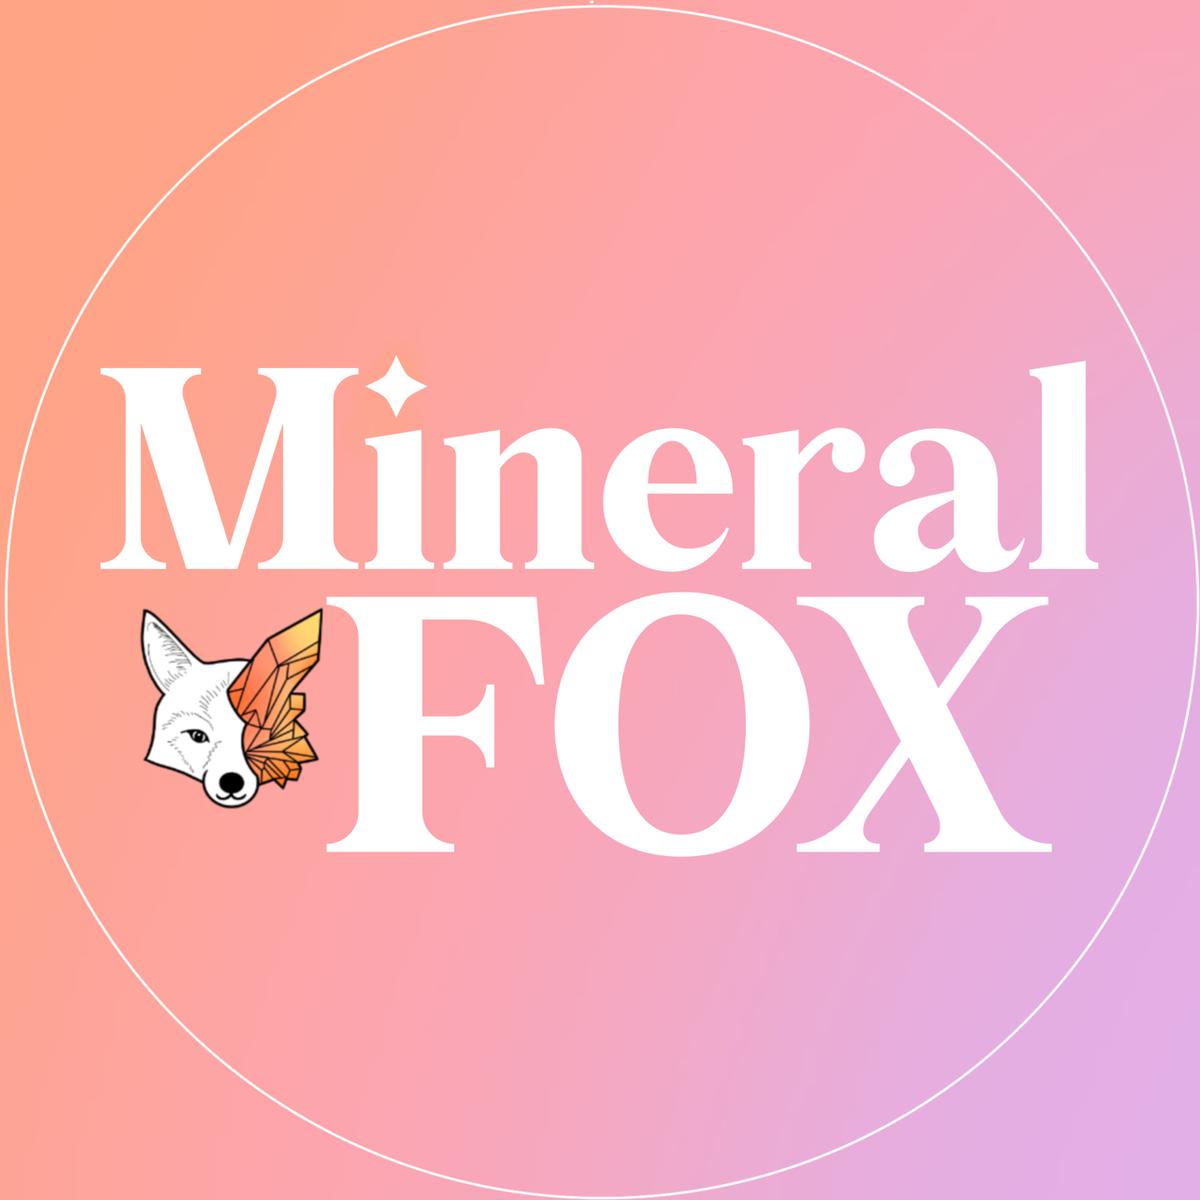 Mineral Fox 's images